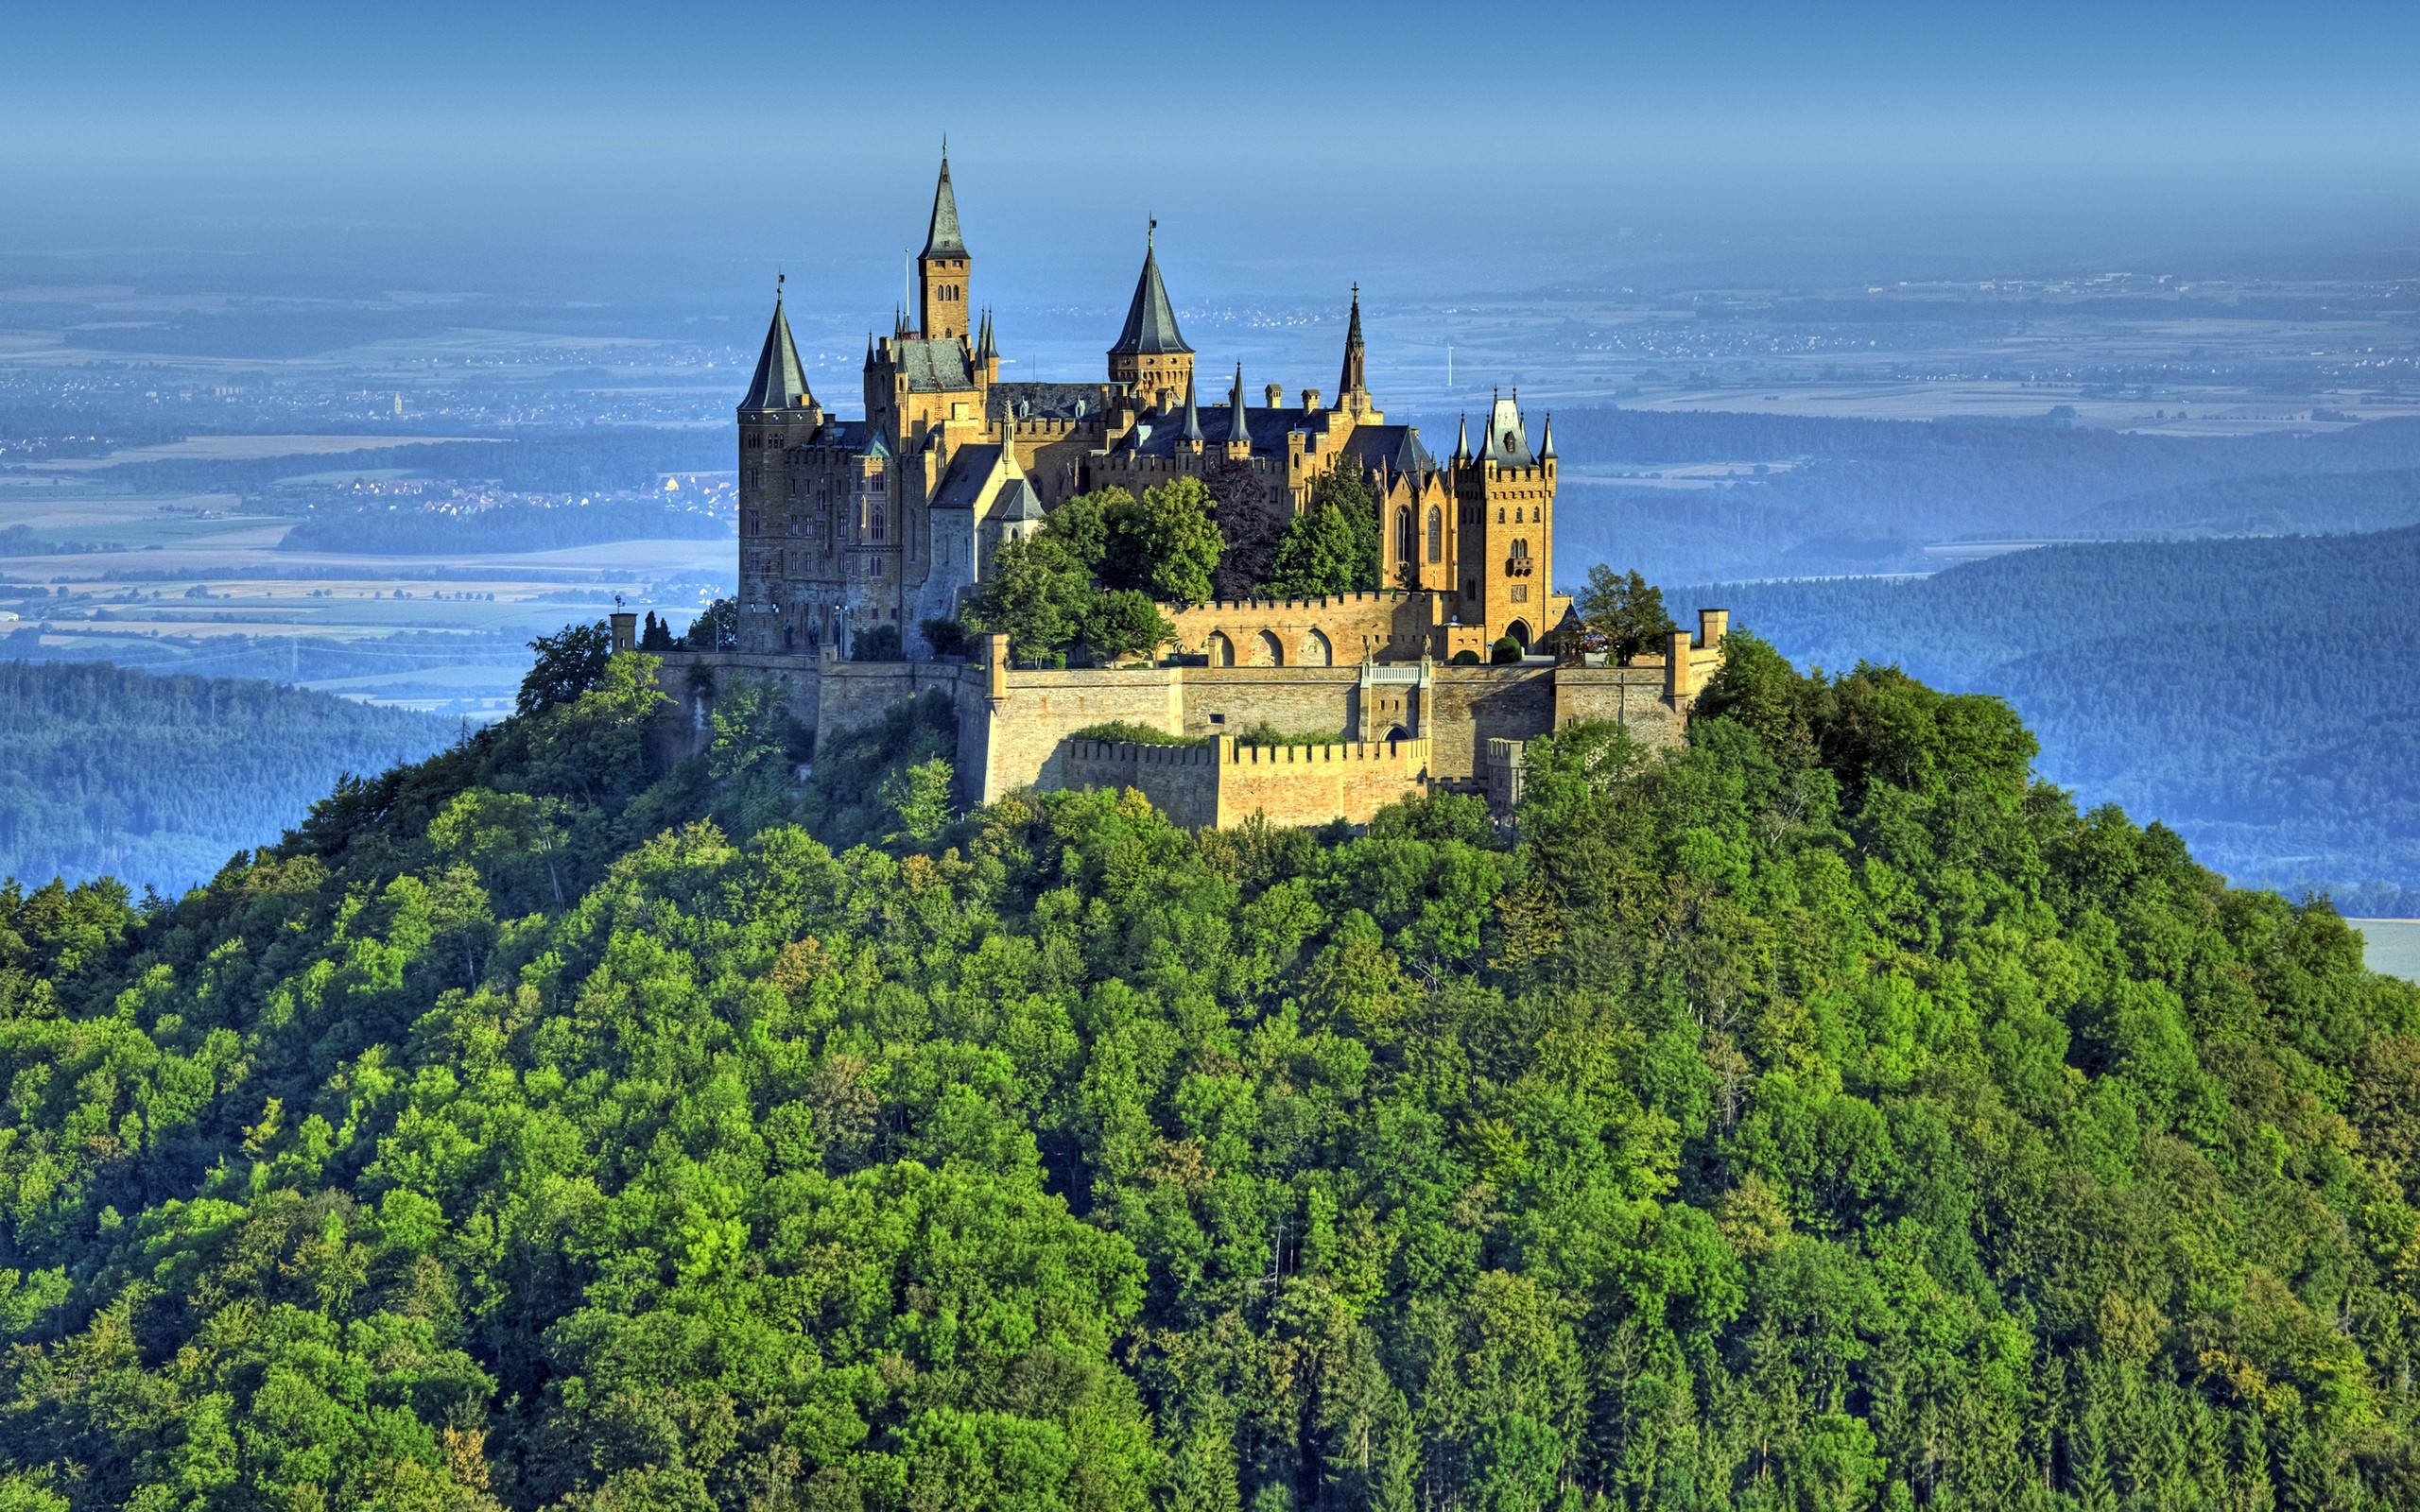 General 2560x1600 nature landscape architecture hills sky trees forest Germany castle tower ancient field Hohenzollern Castle